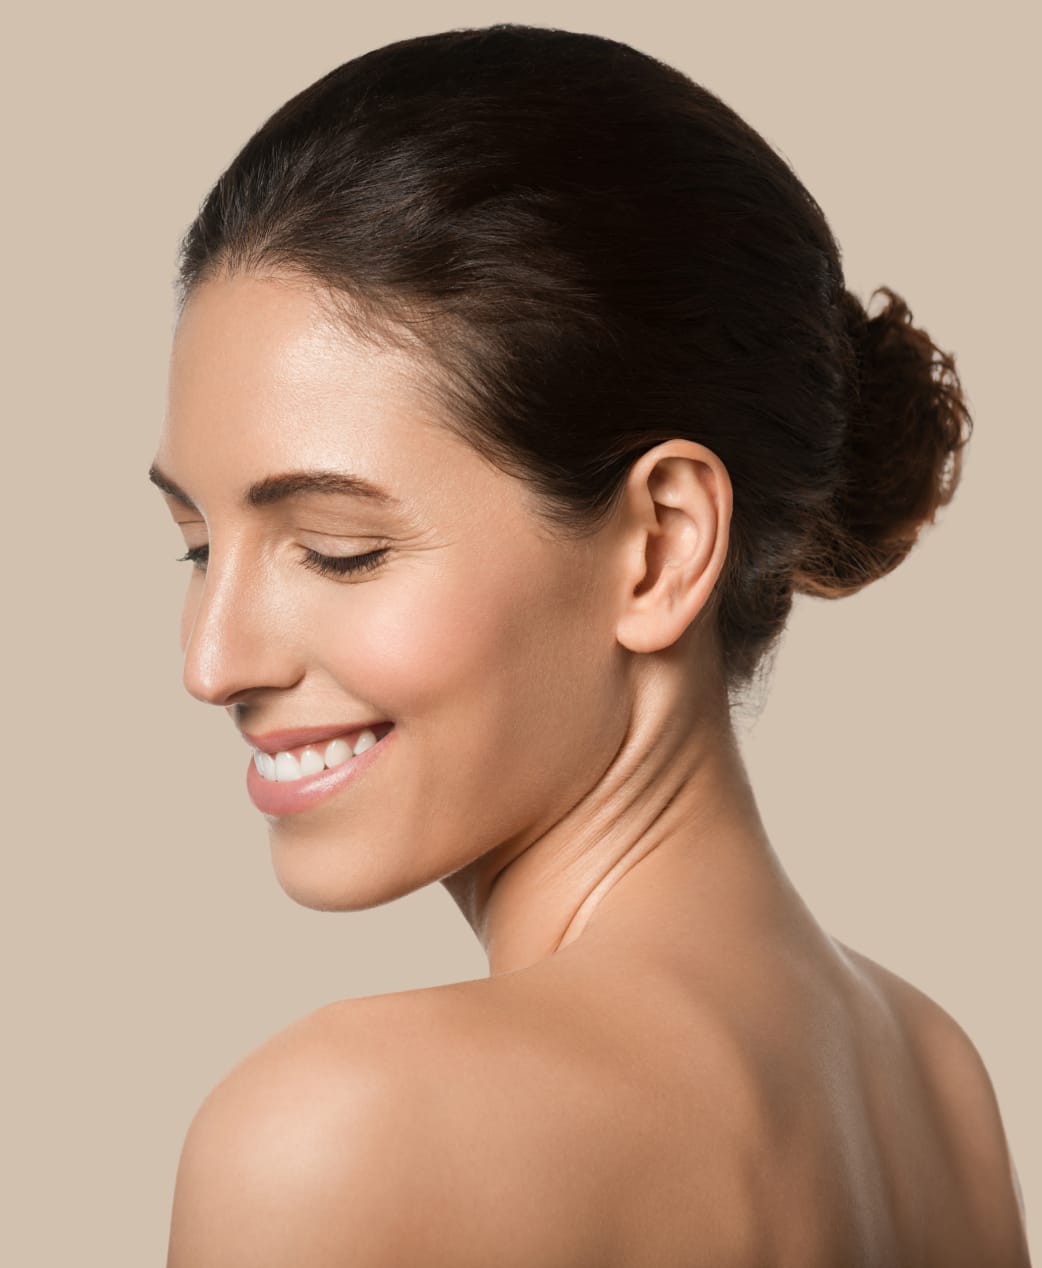 Portrait of a woman with healthy skin smiling